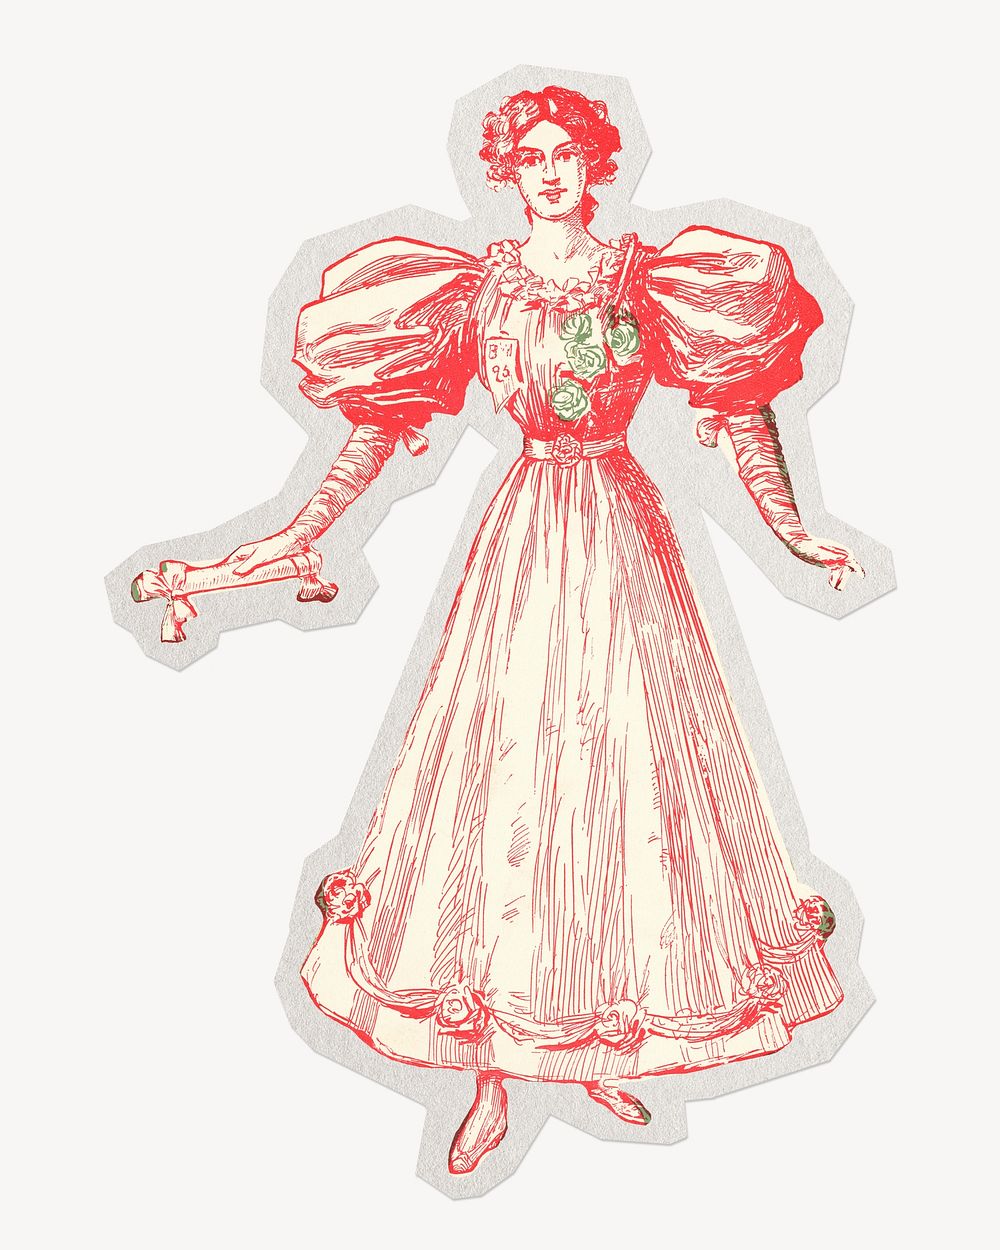 Vintage woman character drawing paper element with white border